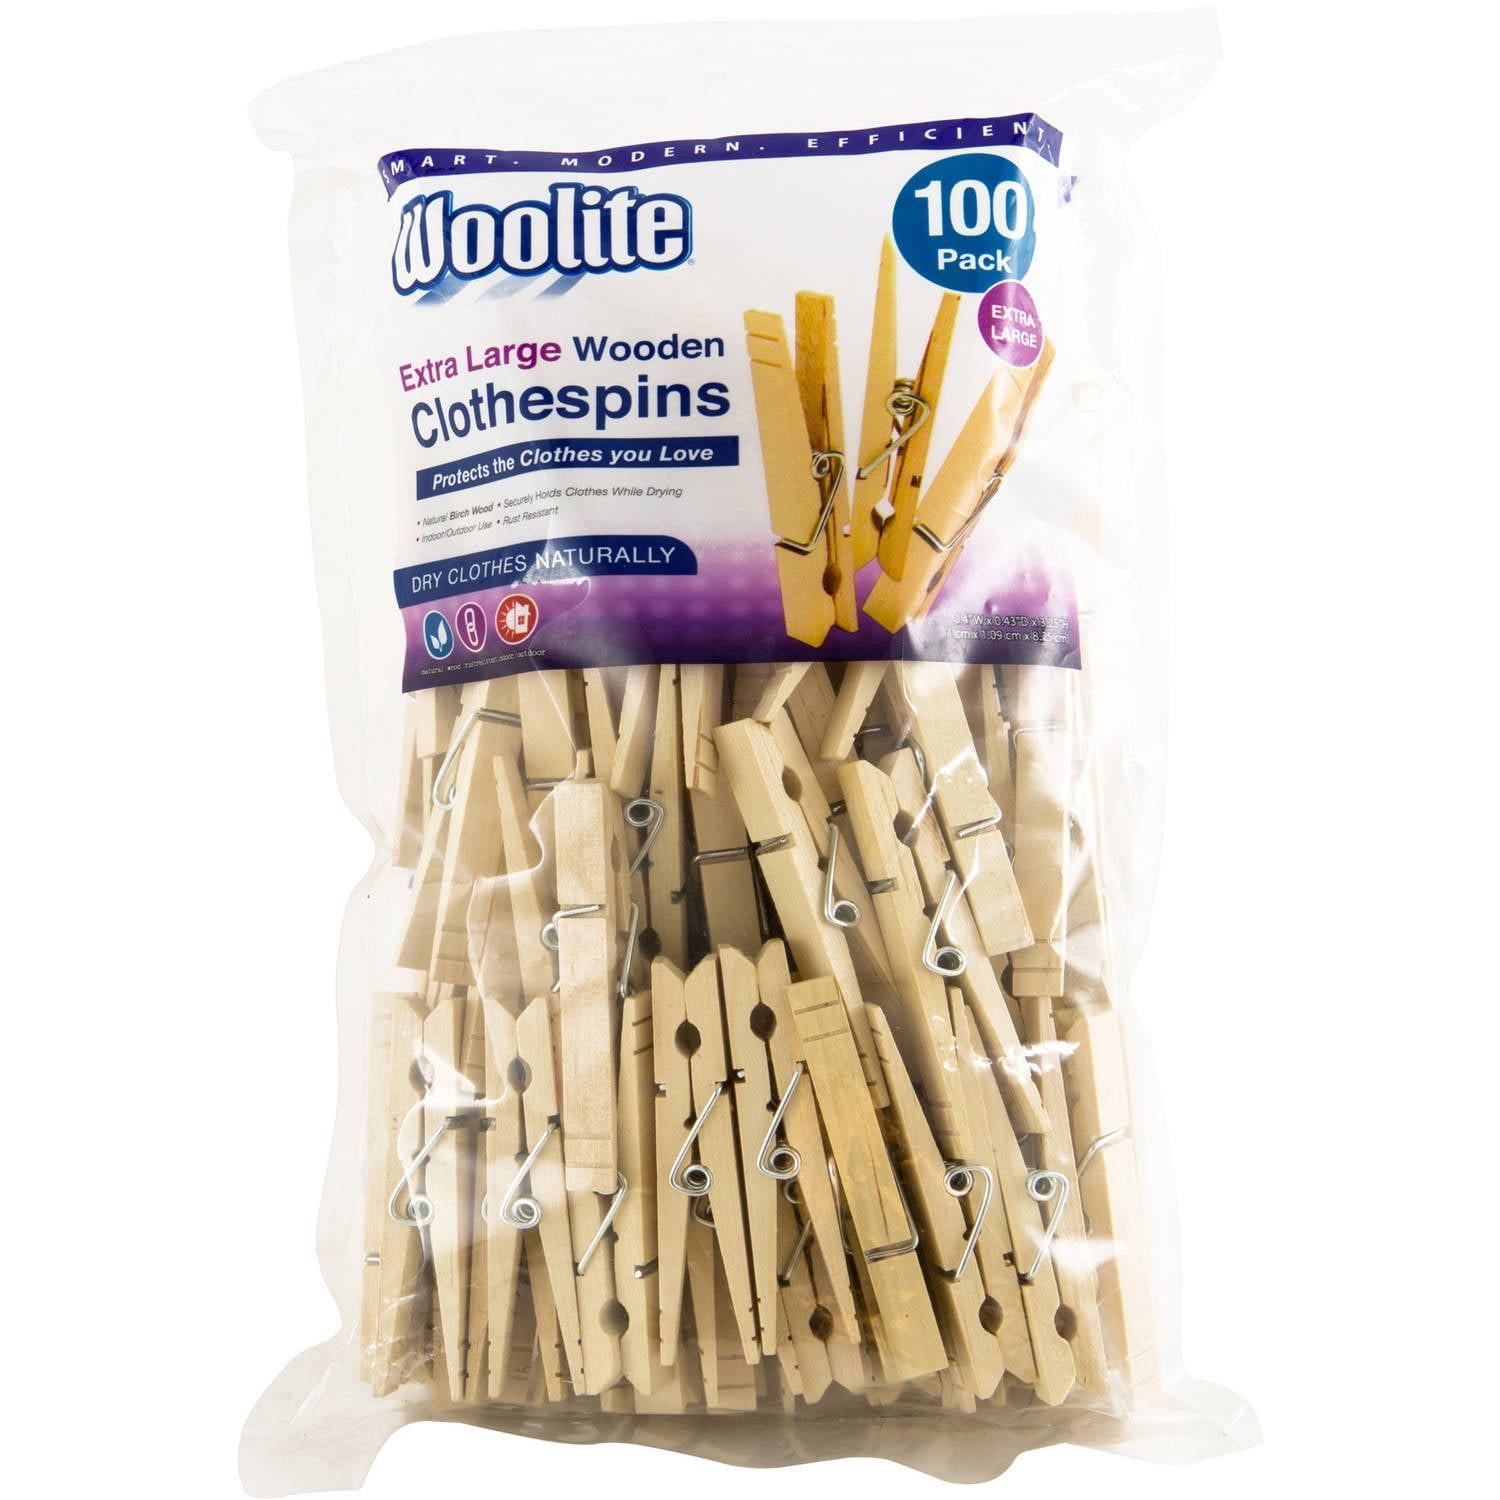 Woolite Extra Large Wooden 100 Pack Clothespins